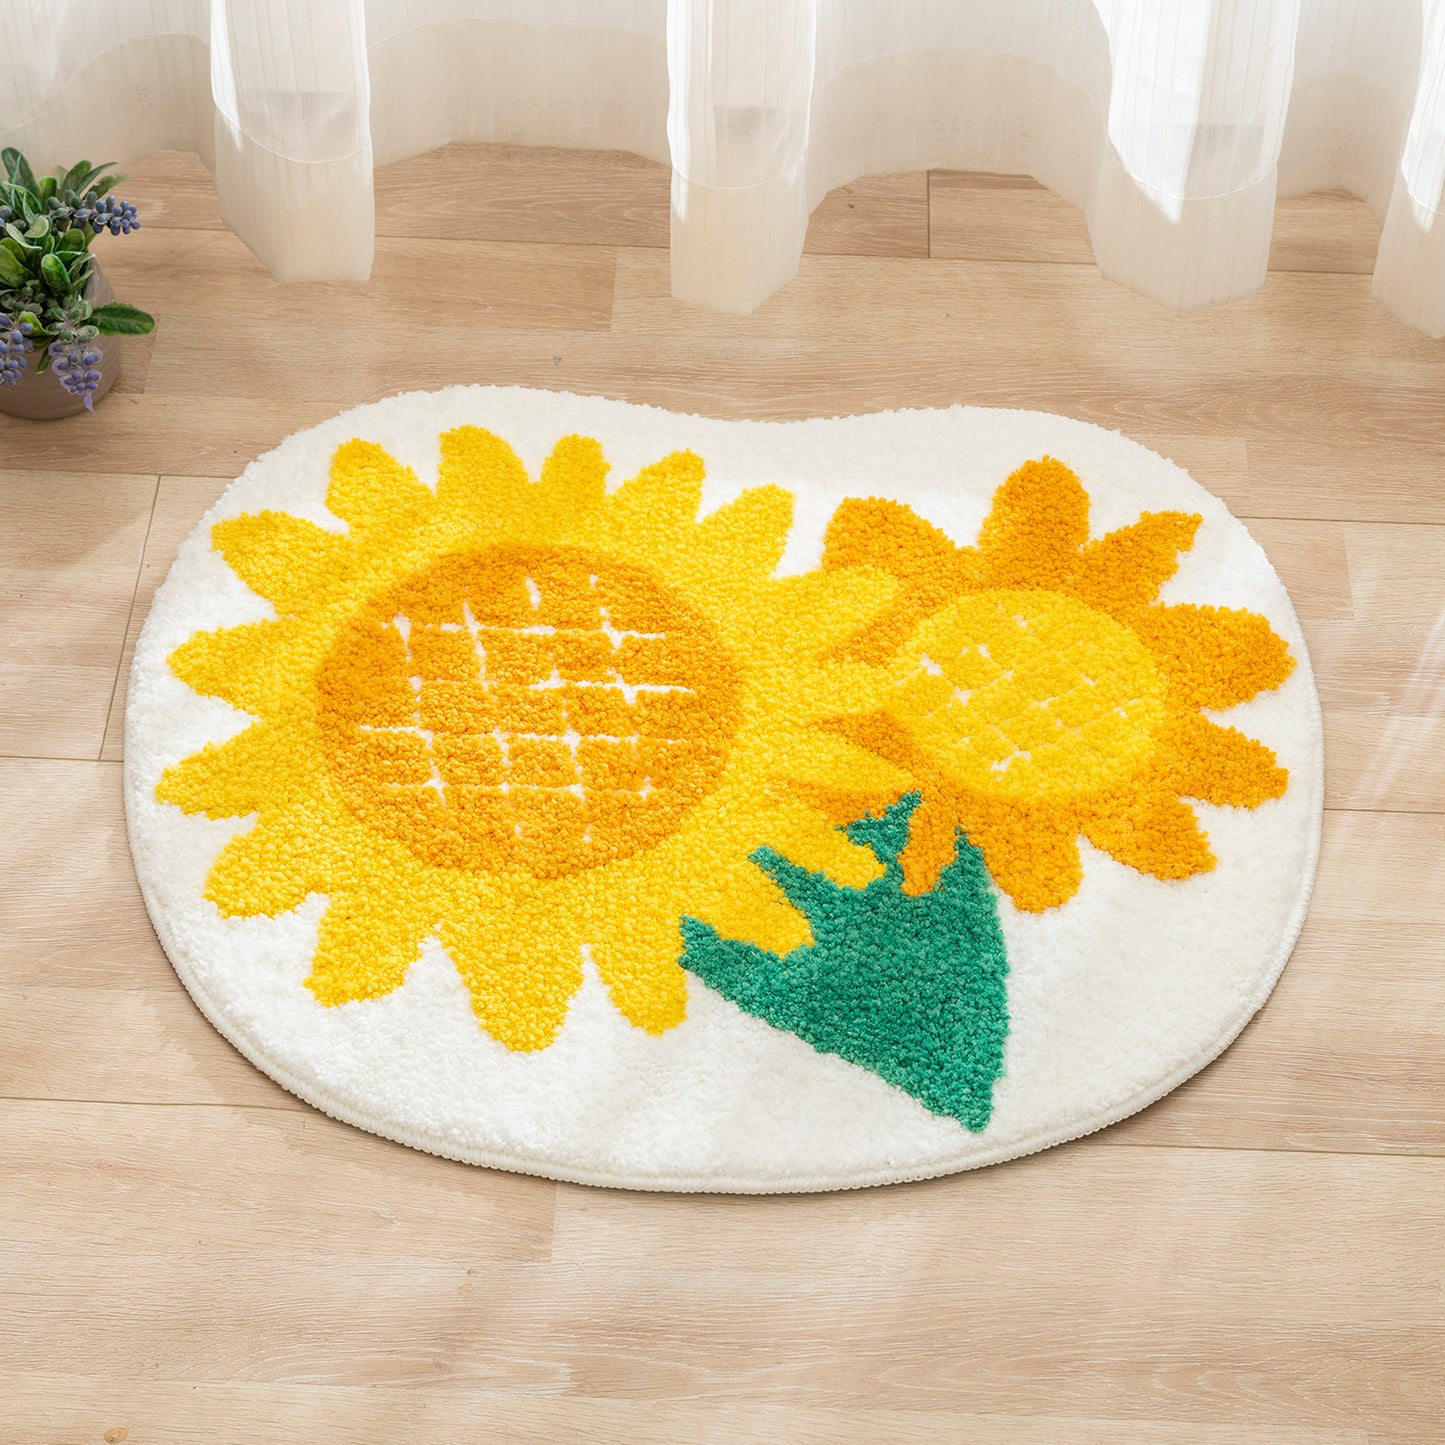 Feblilac Lovely Sunflower and Tree Tufted Bath Mat